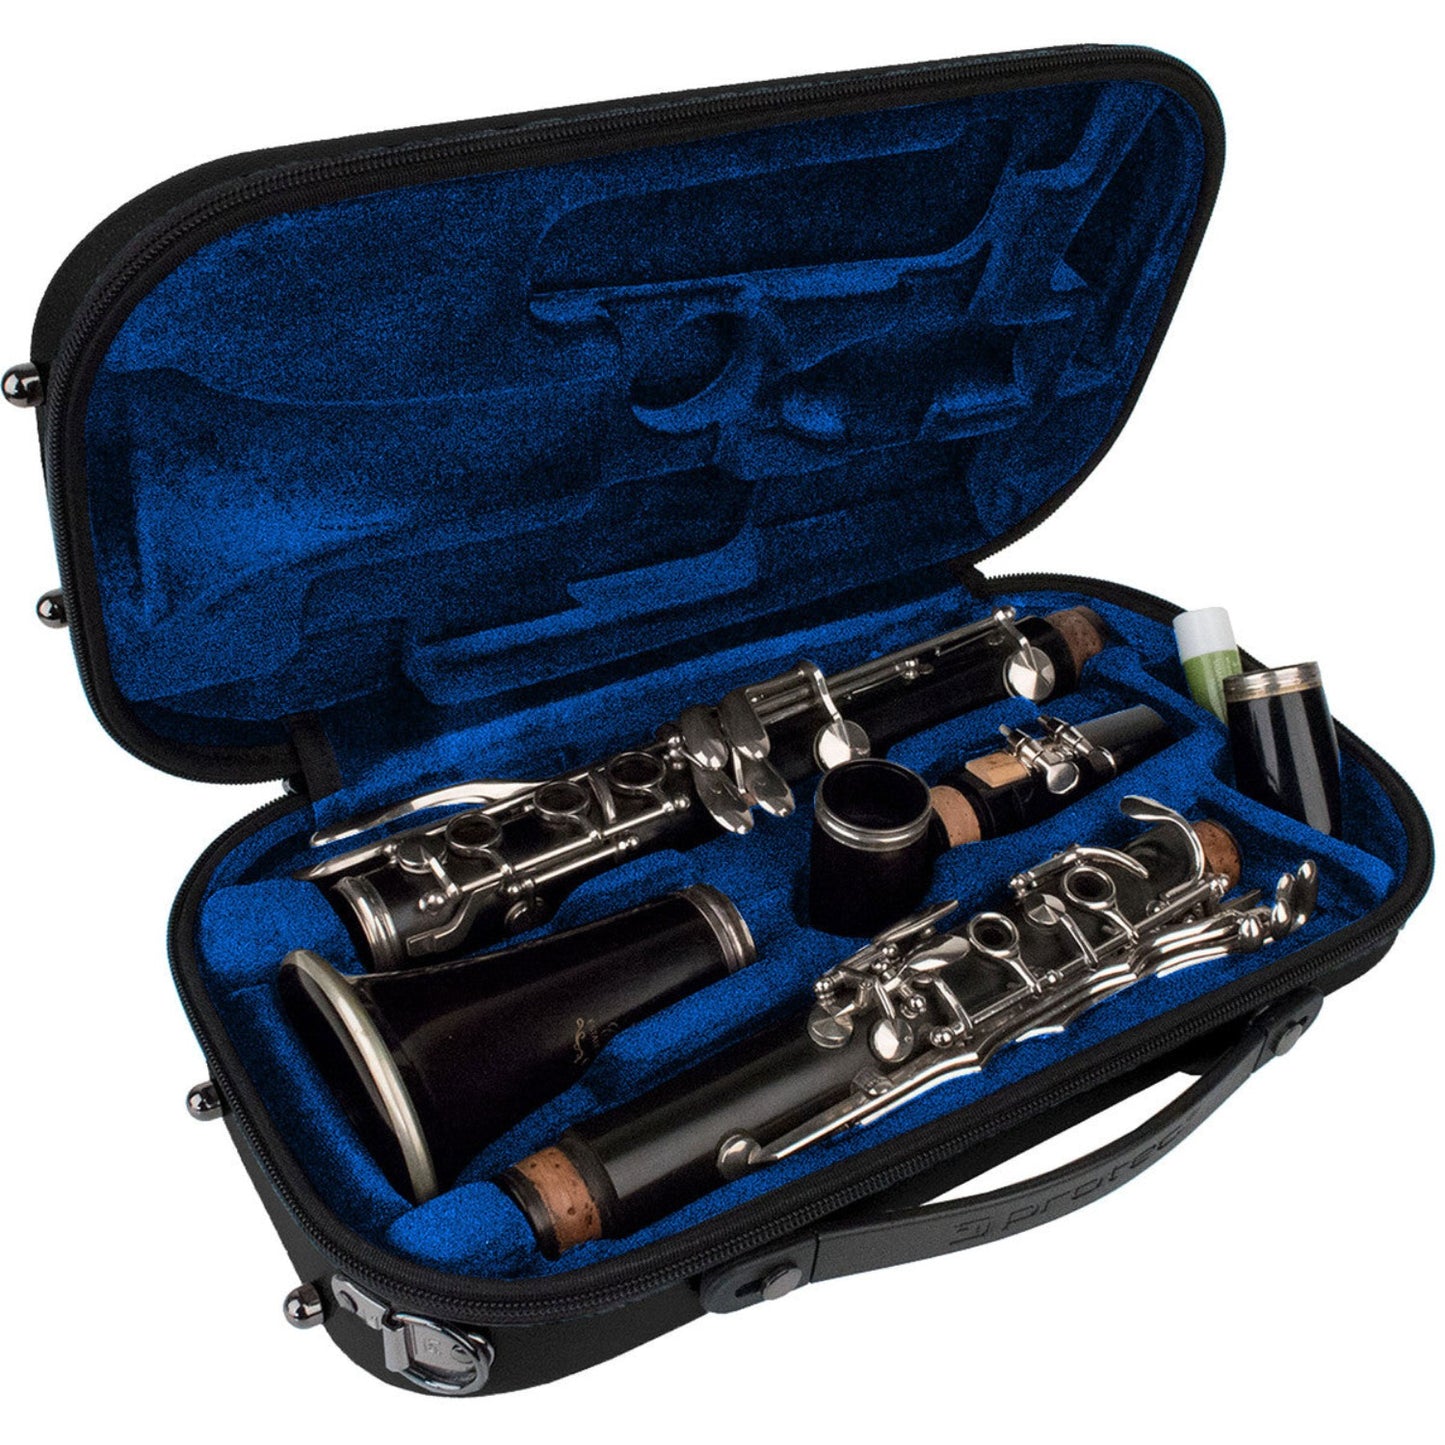 Protec Microzip ABS clarinet case, open, with clarinet inside, on white background